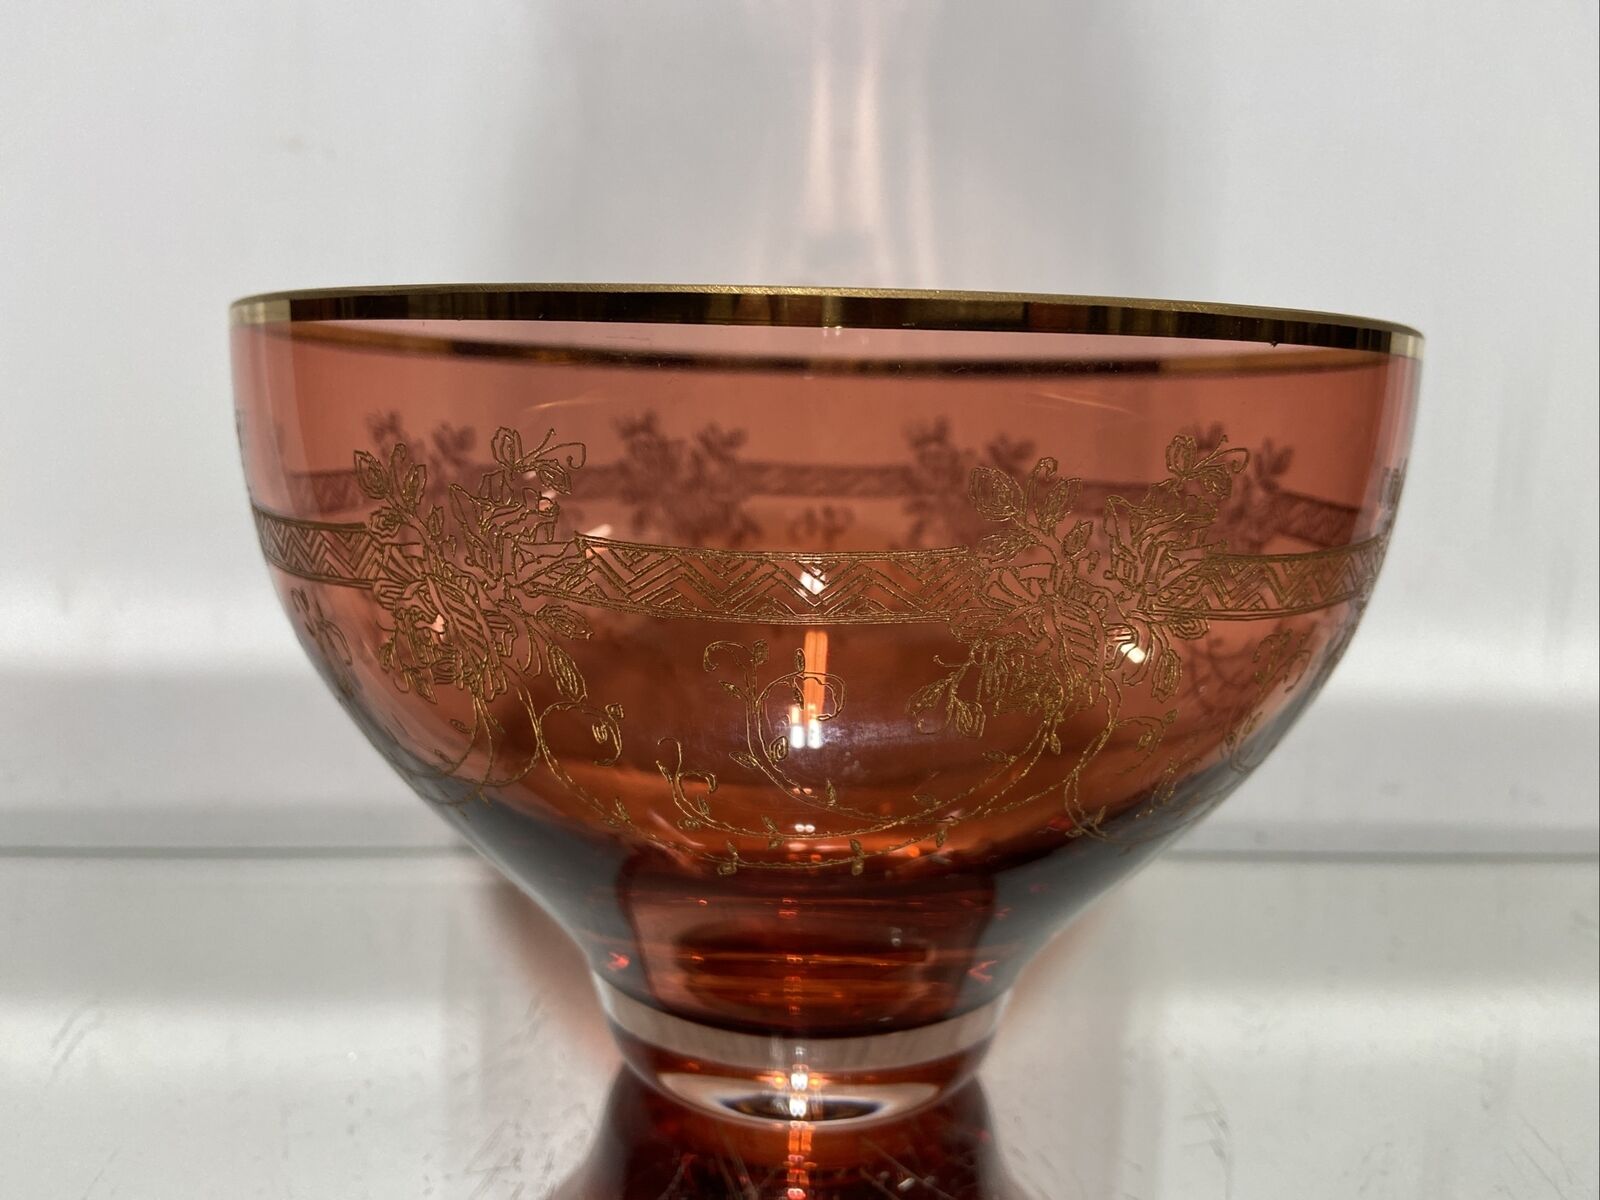 VTG. Bohemian MOSER painted Gold engraved Cranberry Ruby Bowl W/ Floral Motif